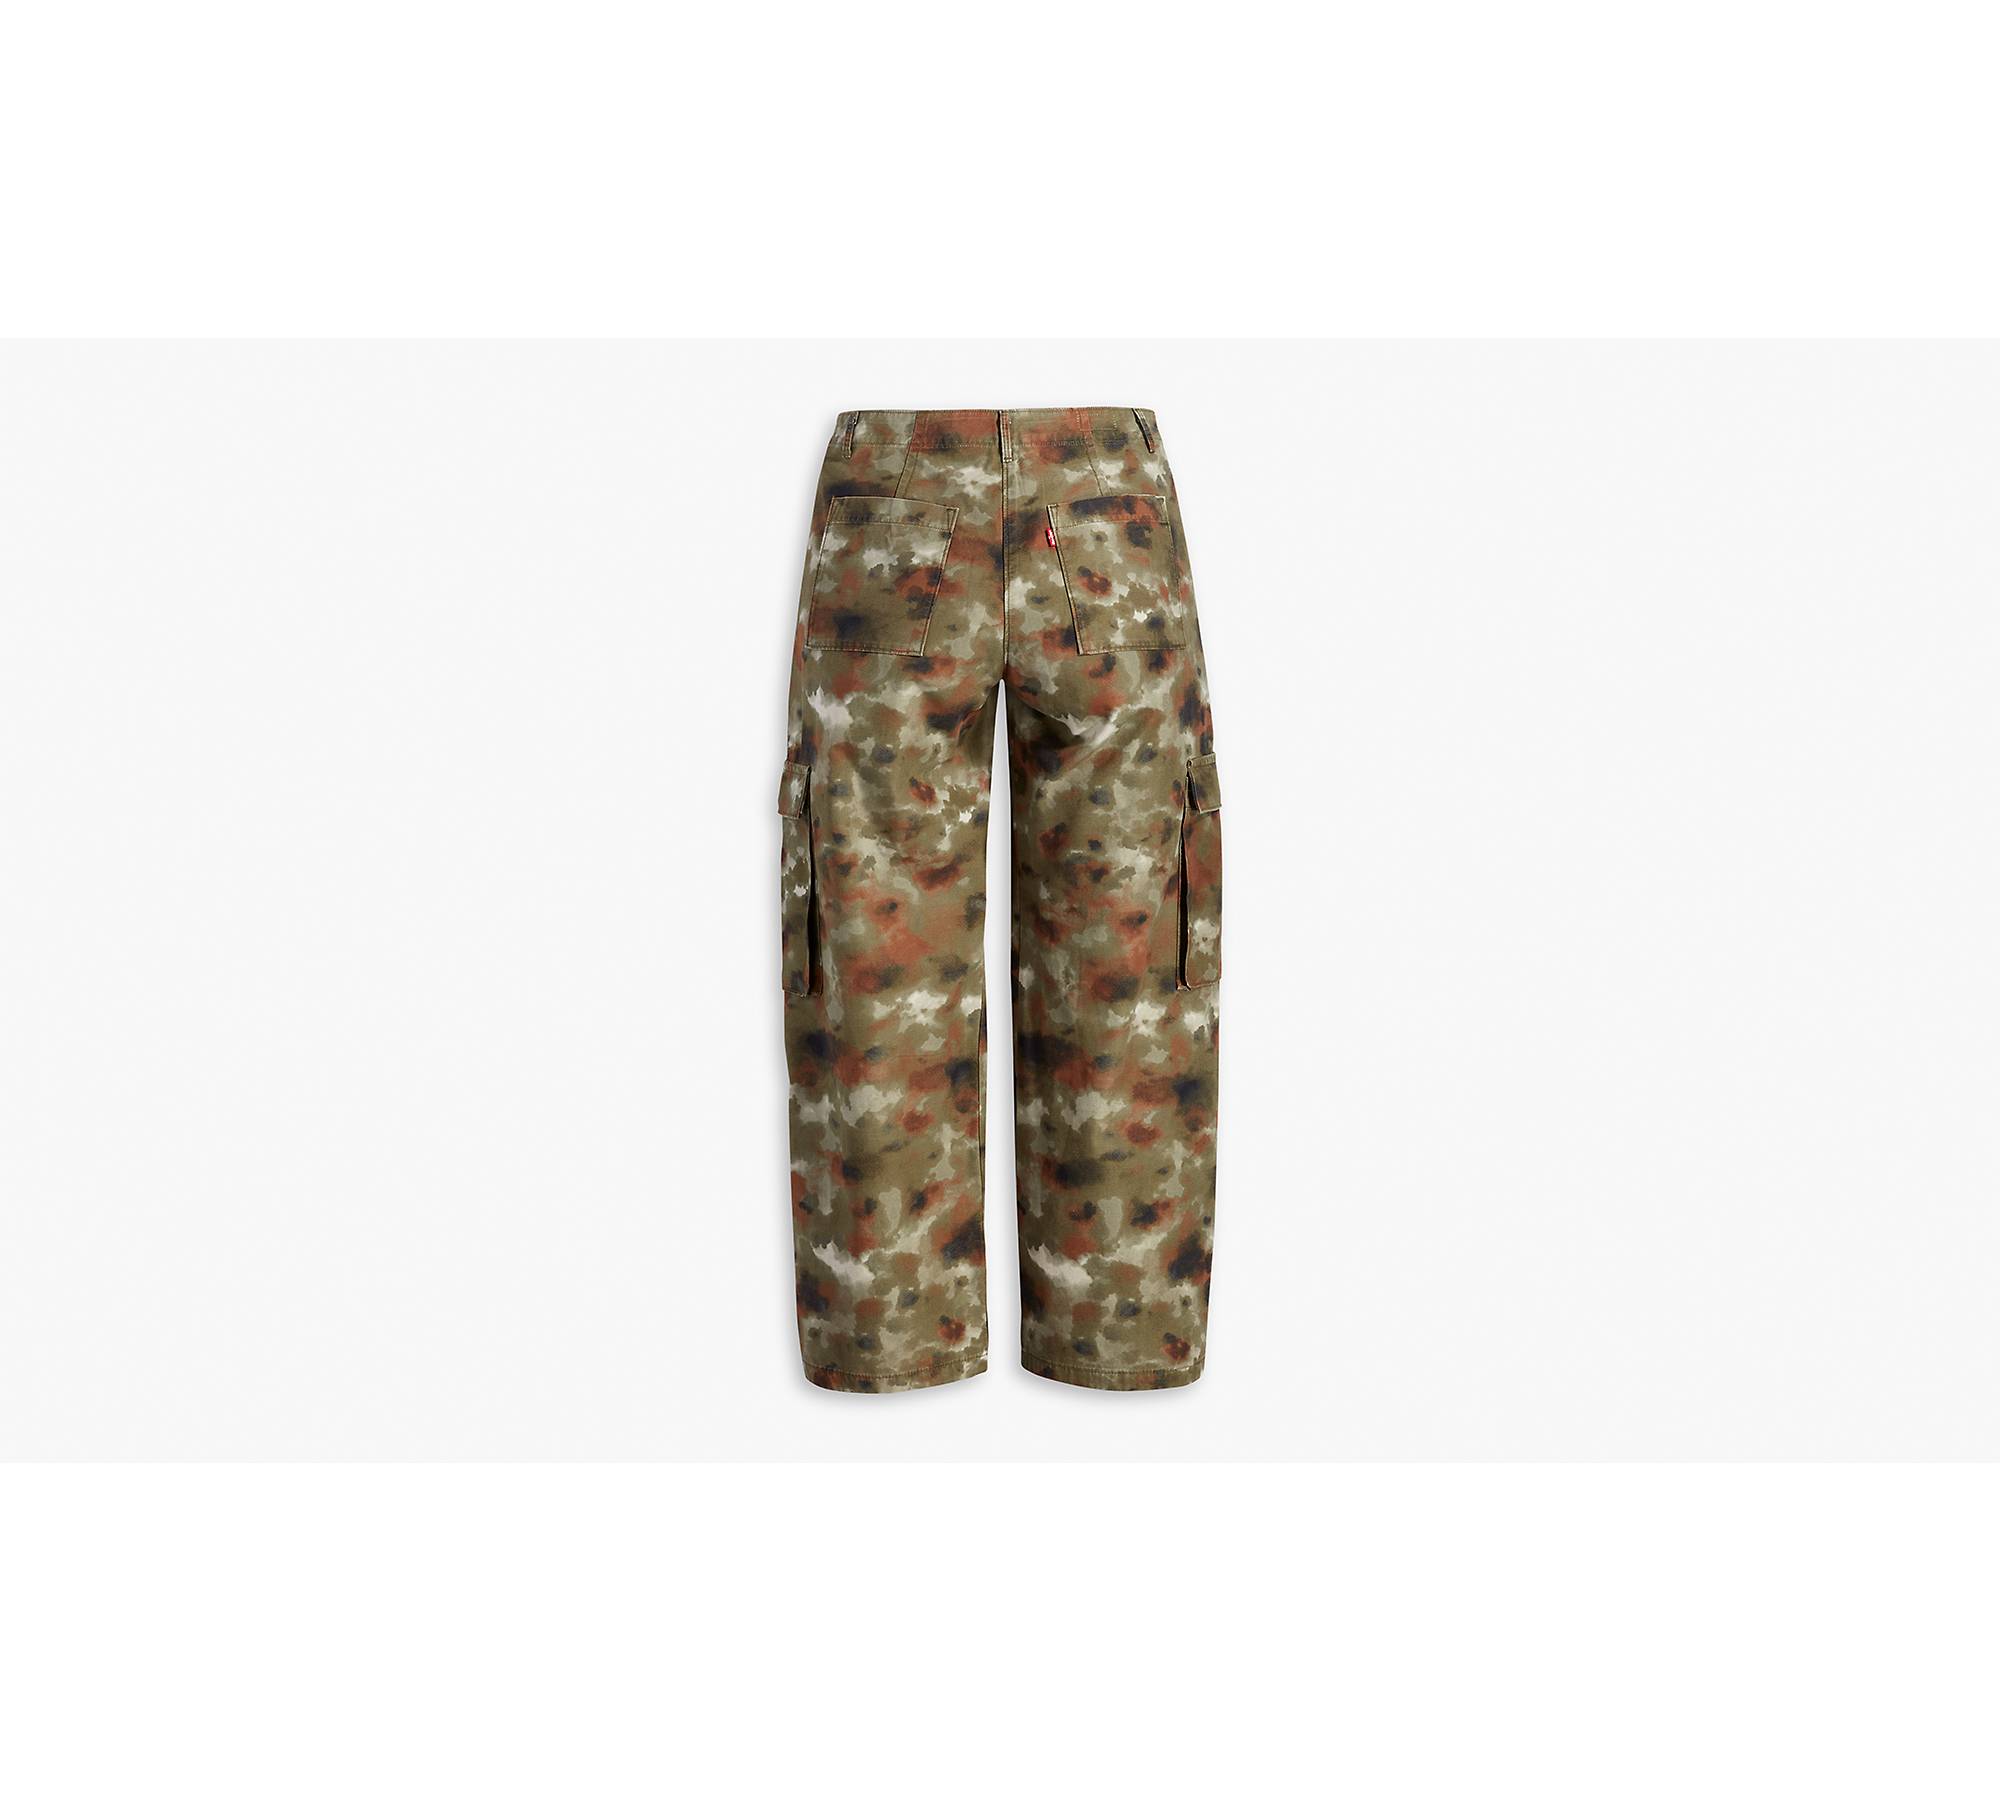 COLOR I-5 CARGO PANTS RED CAMO, PANTS